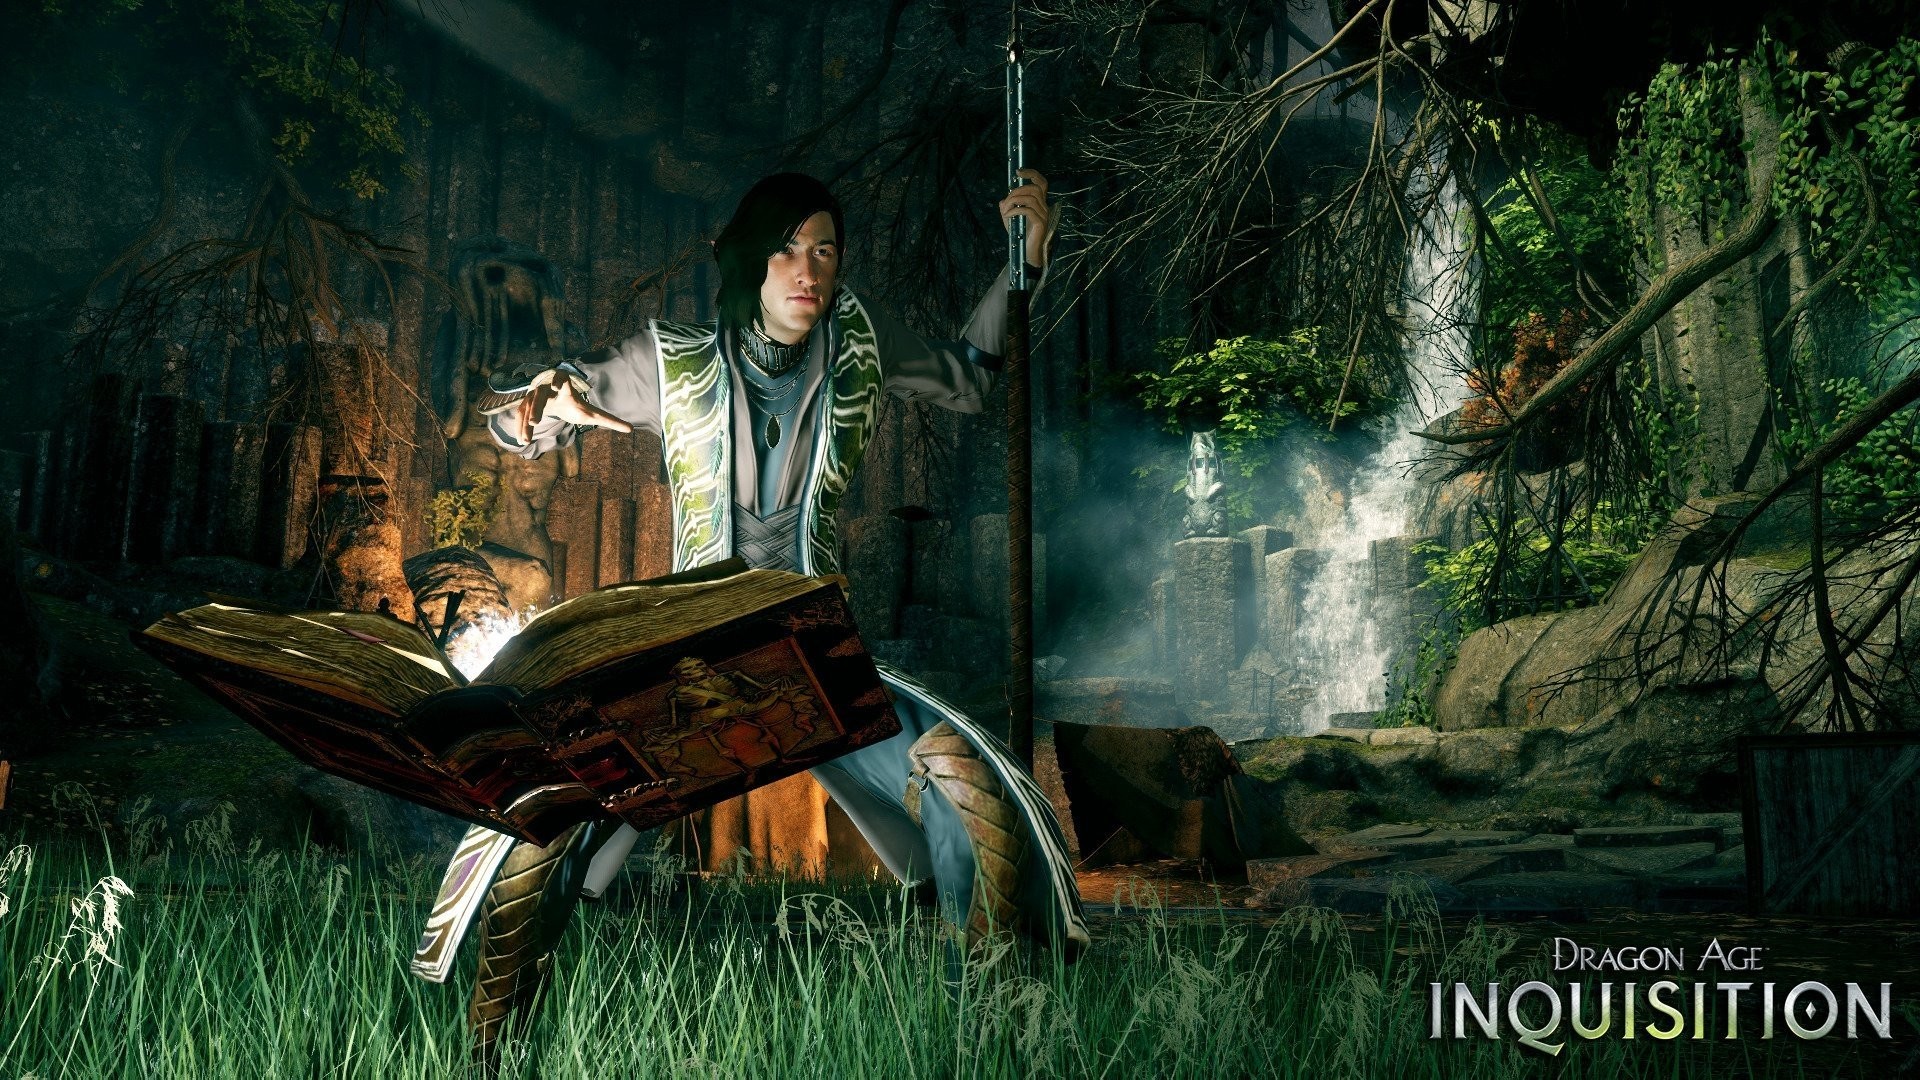 1920x1080 Video Game - Dragon Age: Inquisition Wallpaper